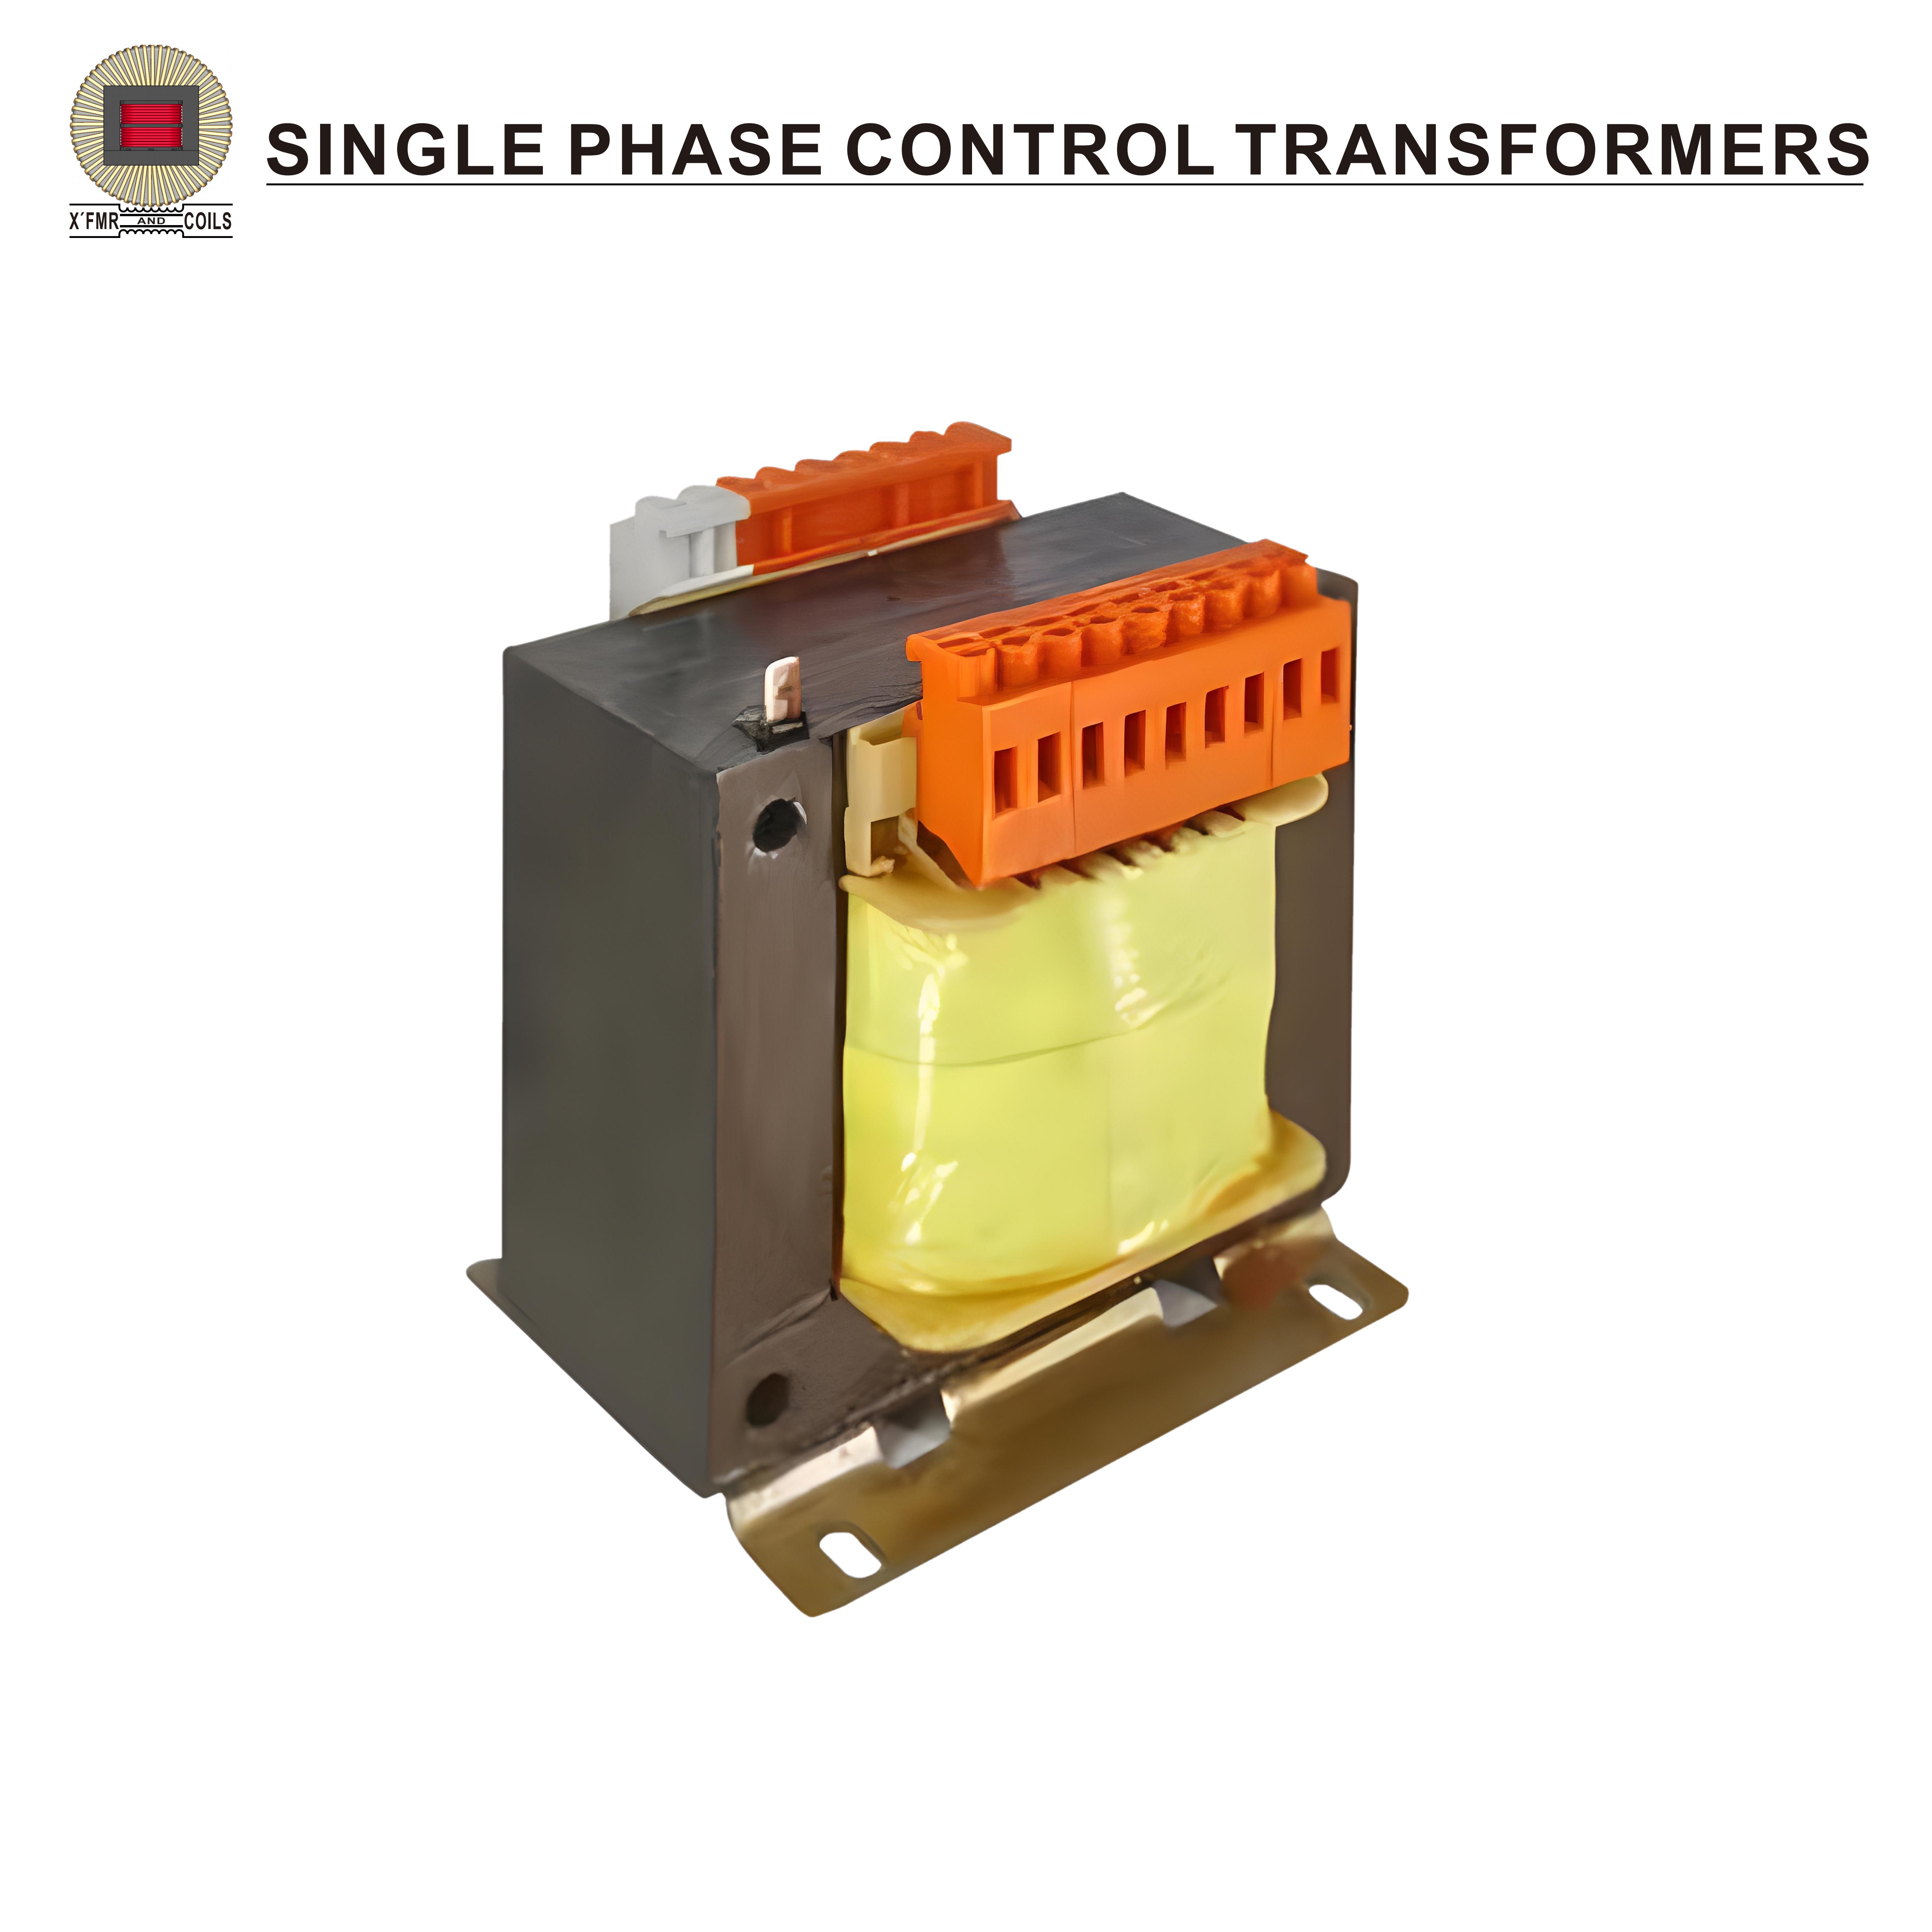 Single Phase Control Transformers SPCT-02 Series